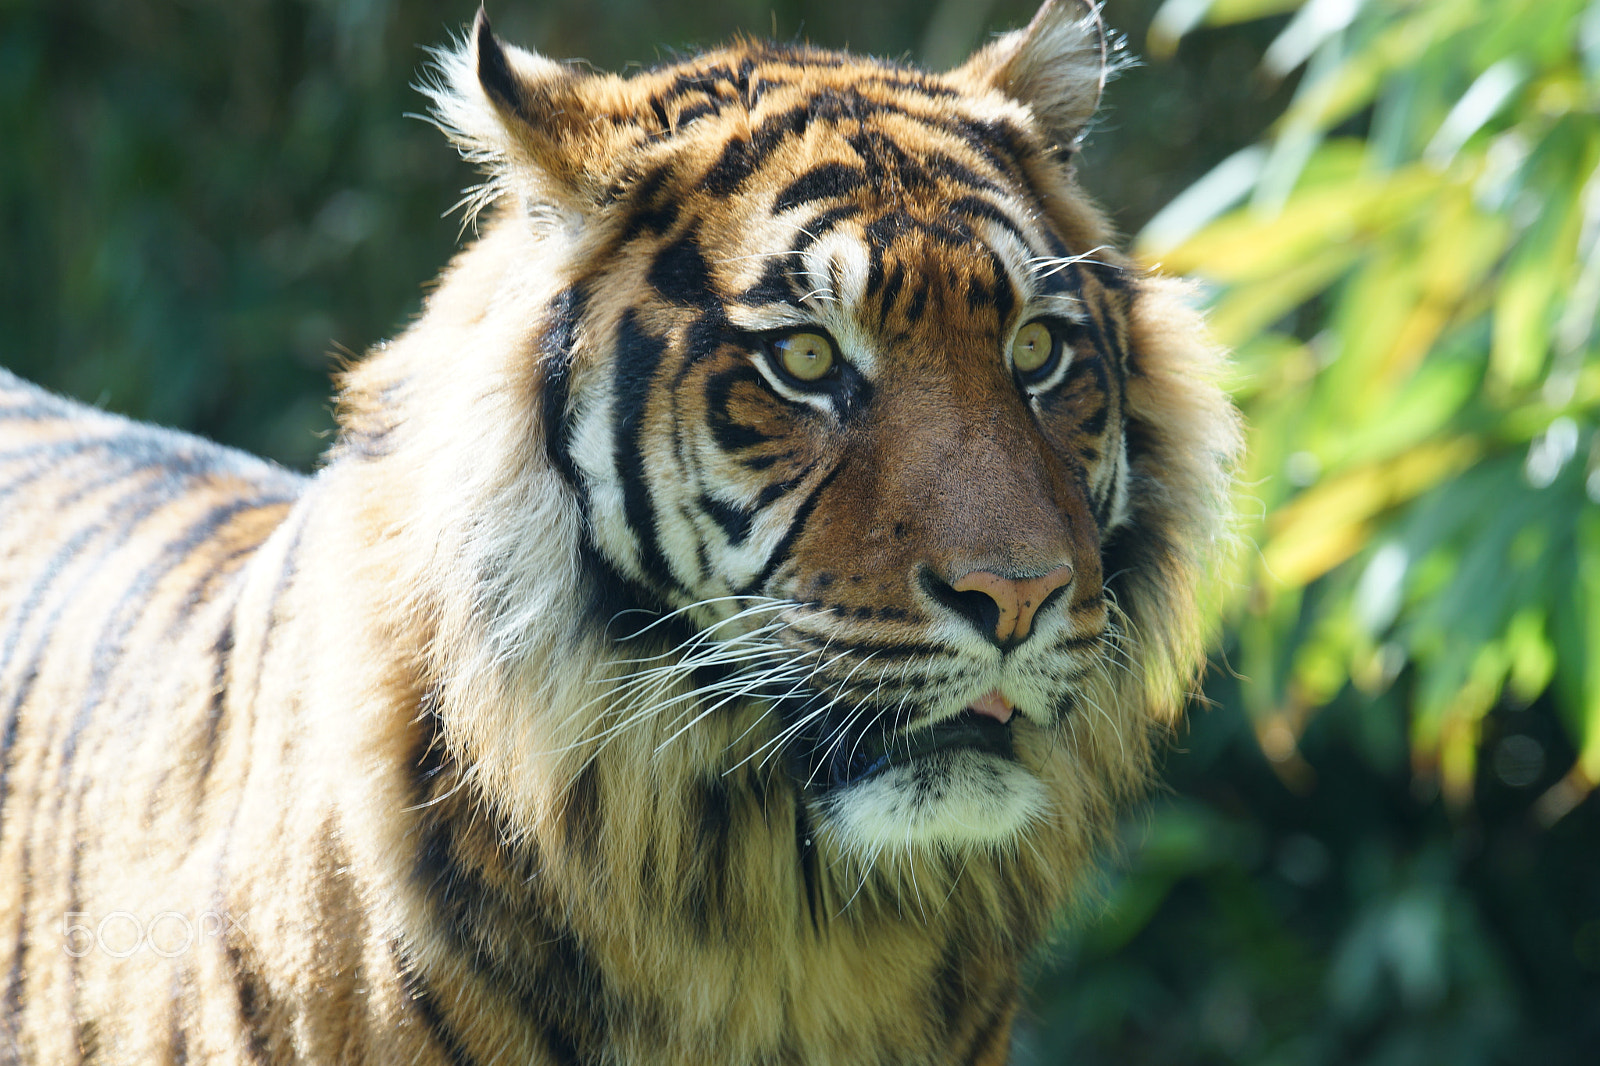 Sony a99 II sample photo. Tiger photography